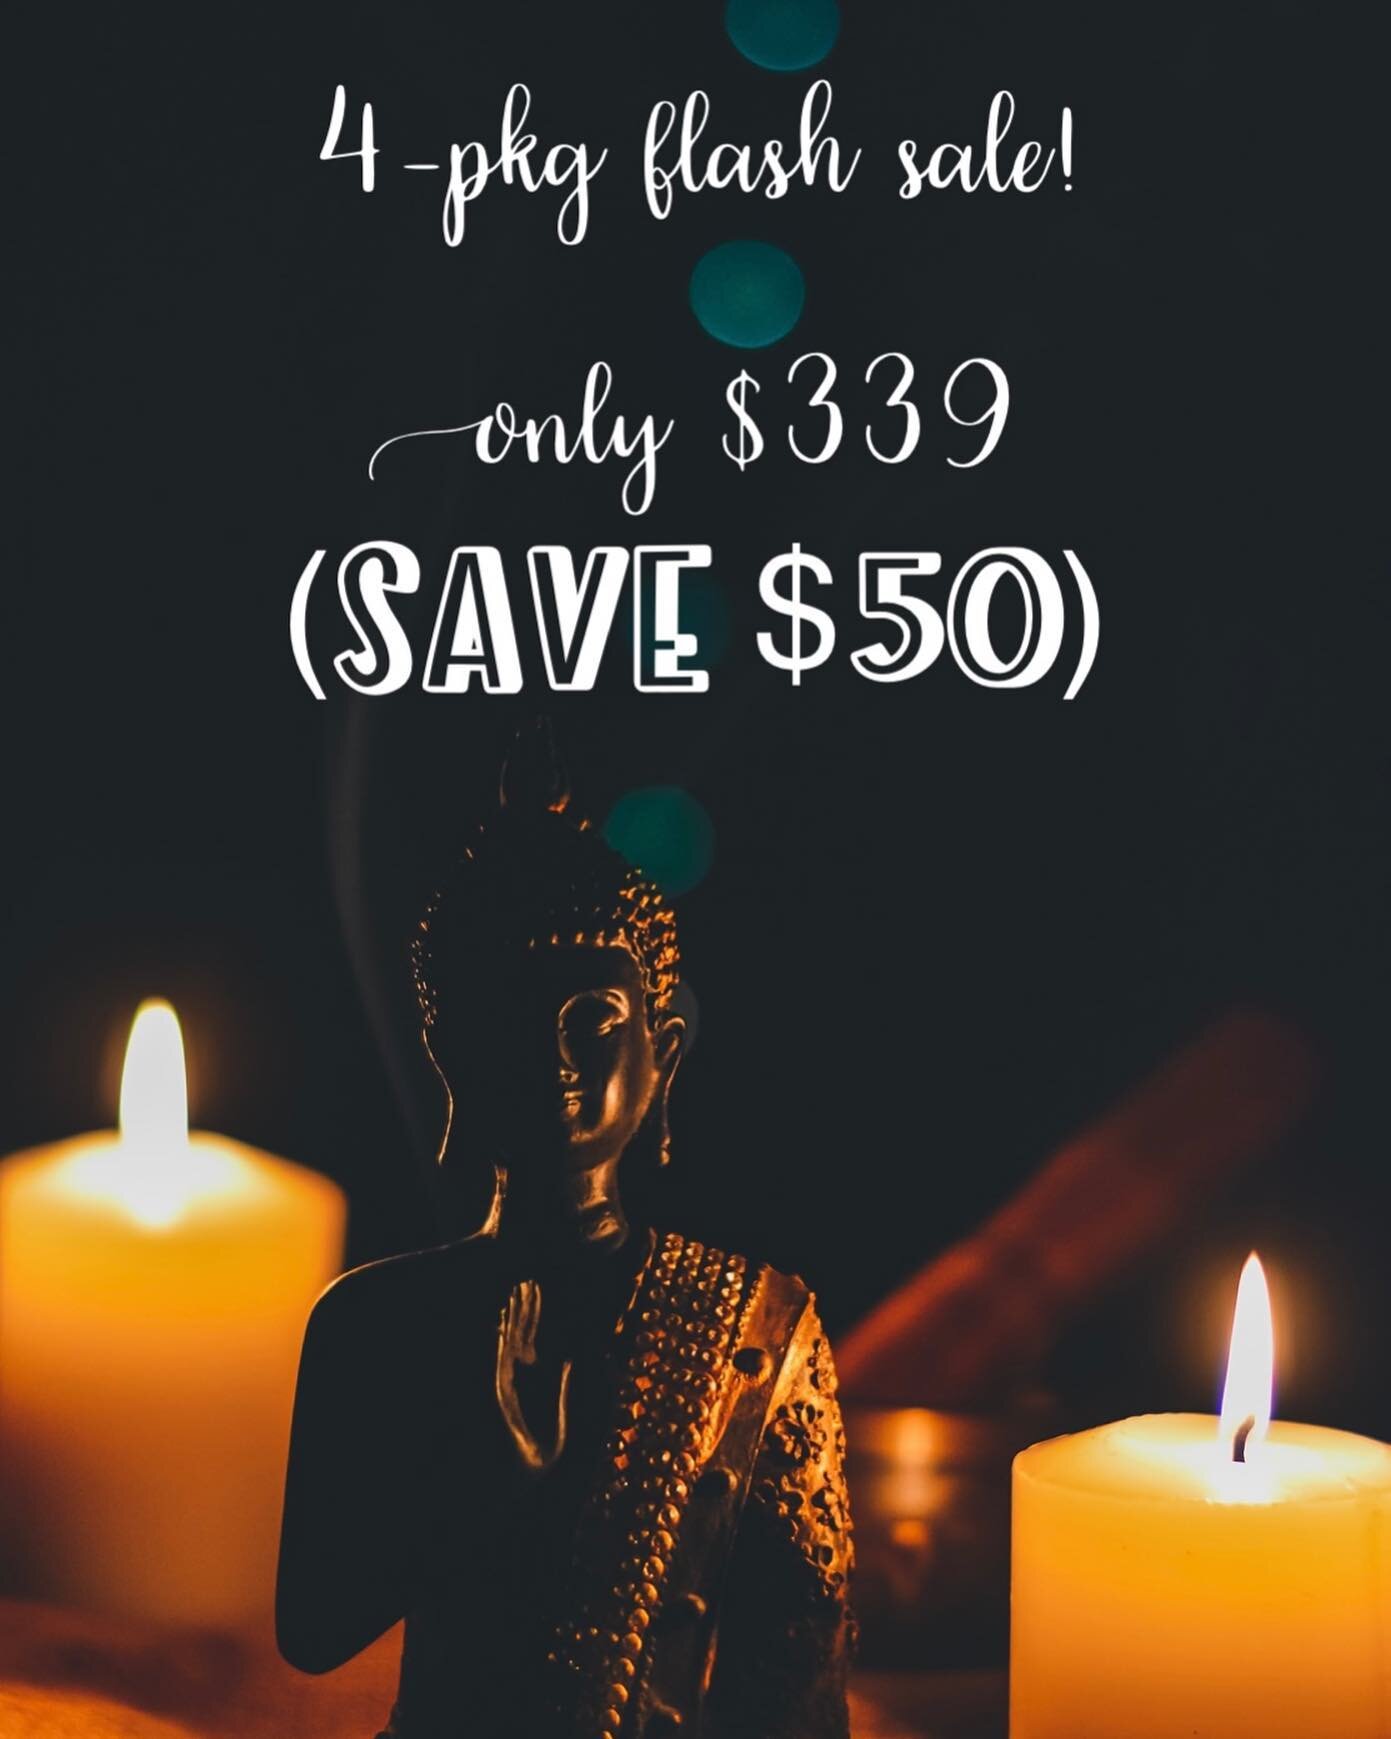 🎁 Enjoy $50 off our package of four acupuncture sessions. Sale ends Tuesday at noon, package expires 90 days from purchase. 

Linktree: Cyber Monday Package - no coupon code needed. 
Only $339 down from $389

Here&rsquo;s to recommitting to your sel